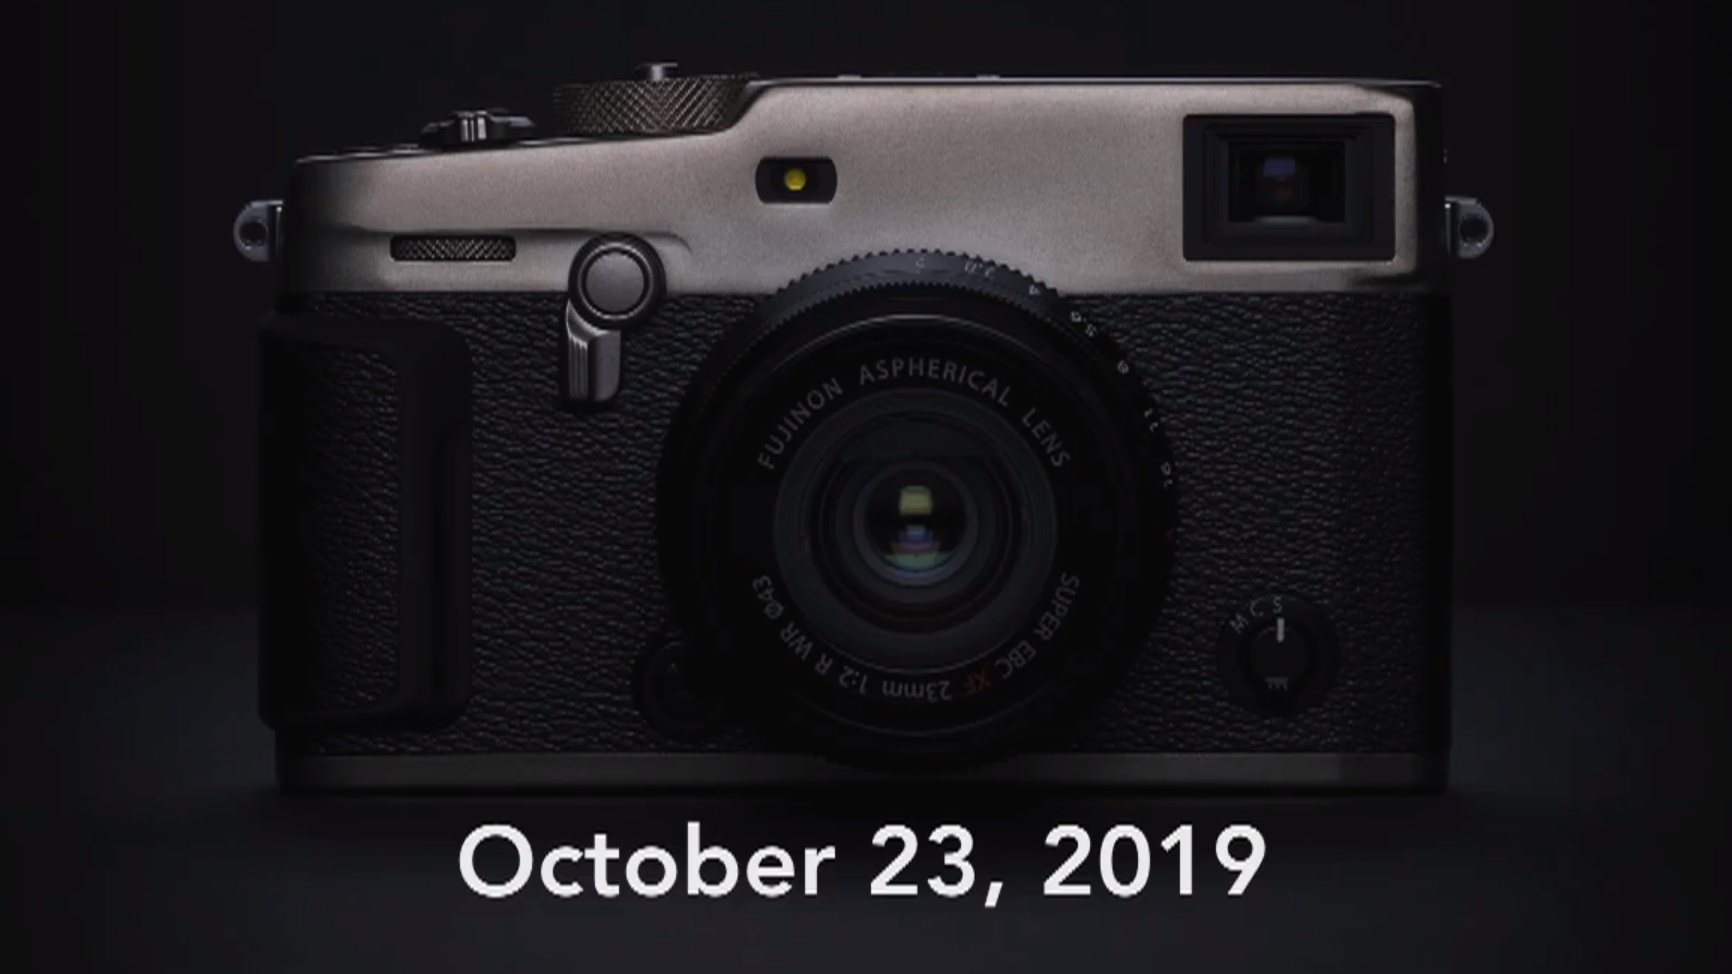 Indirect Assert Maken Fujifilm X-Pro3 confirmed, with a 'hidden' LCD and redesigned EVF |  TechRadar